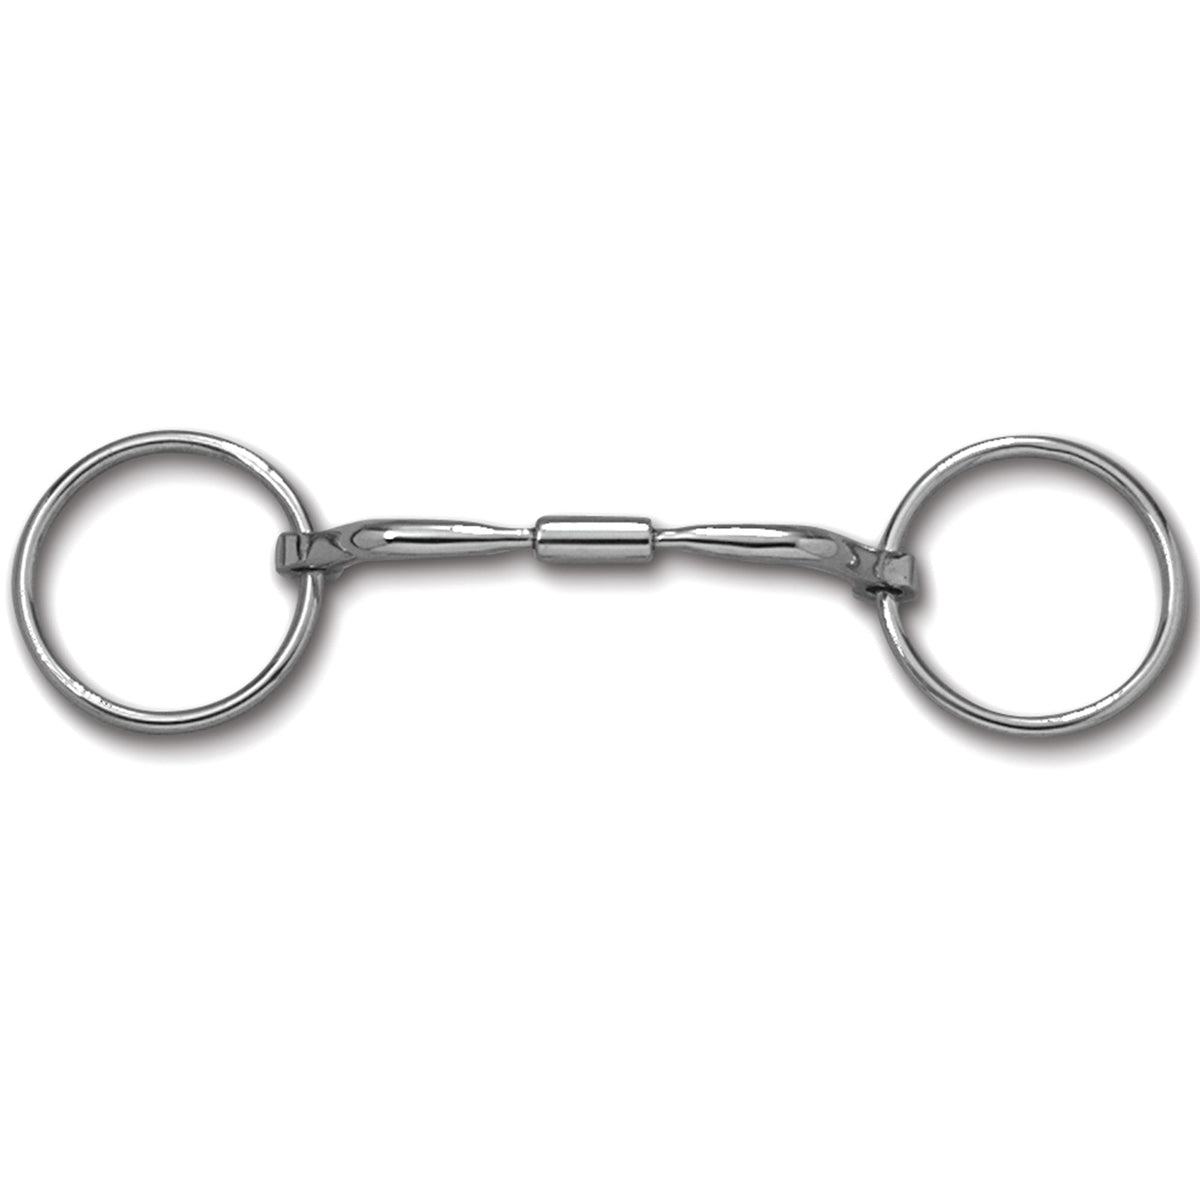 Myler Loose Ring with Stainless Steel Comfort Snaffle Wide Barrel MB 02